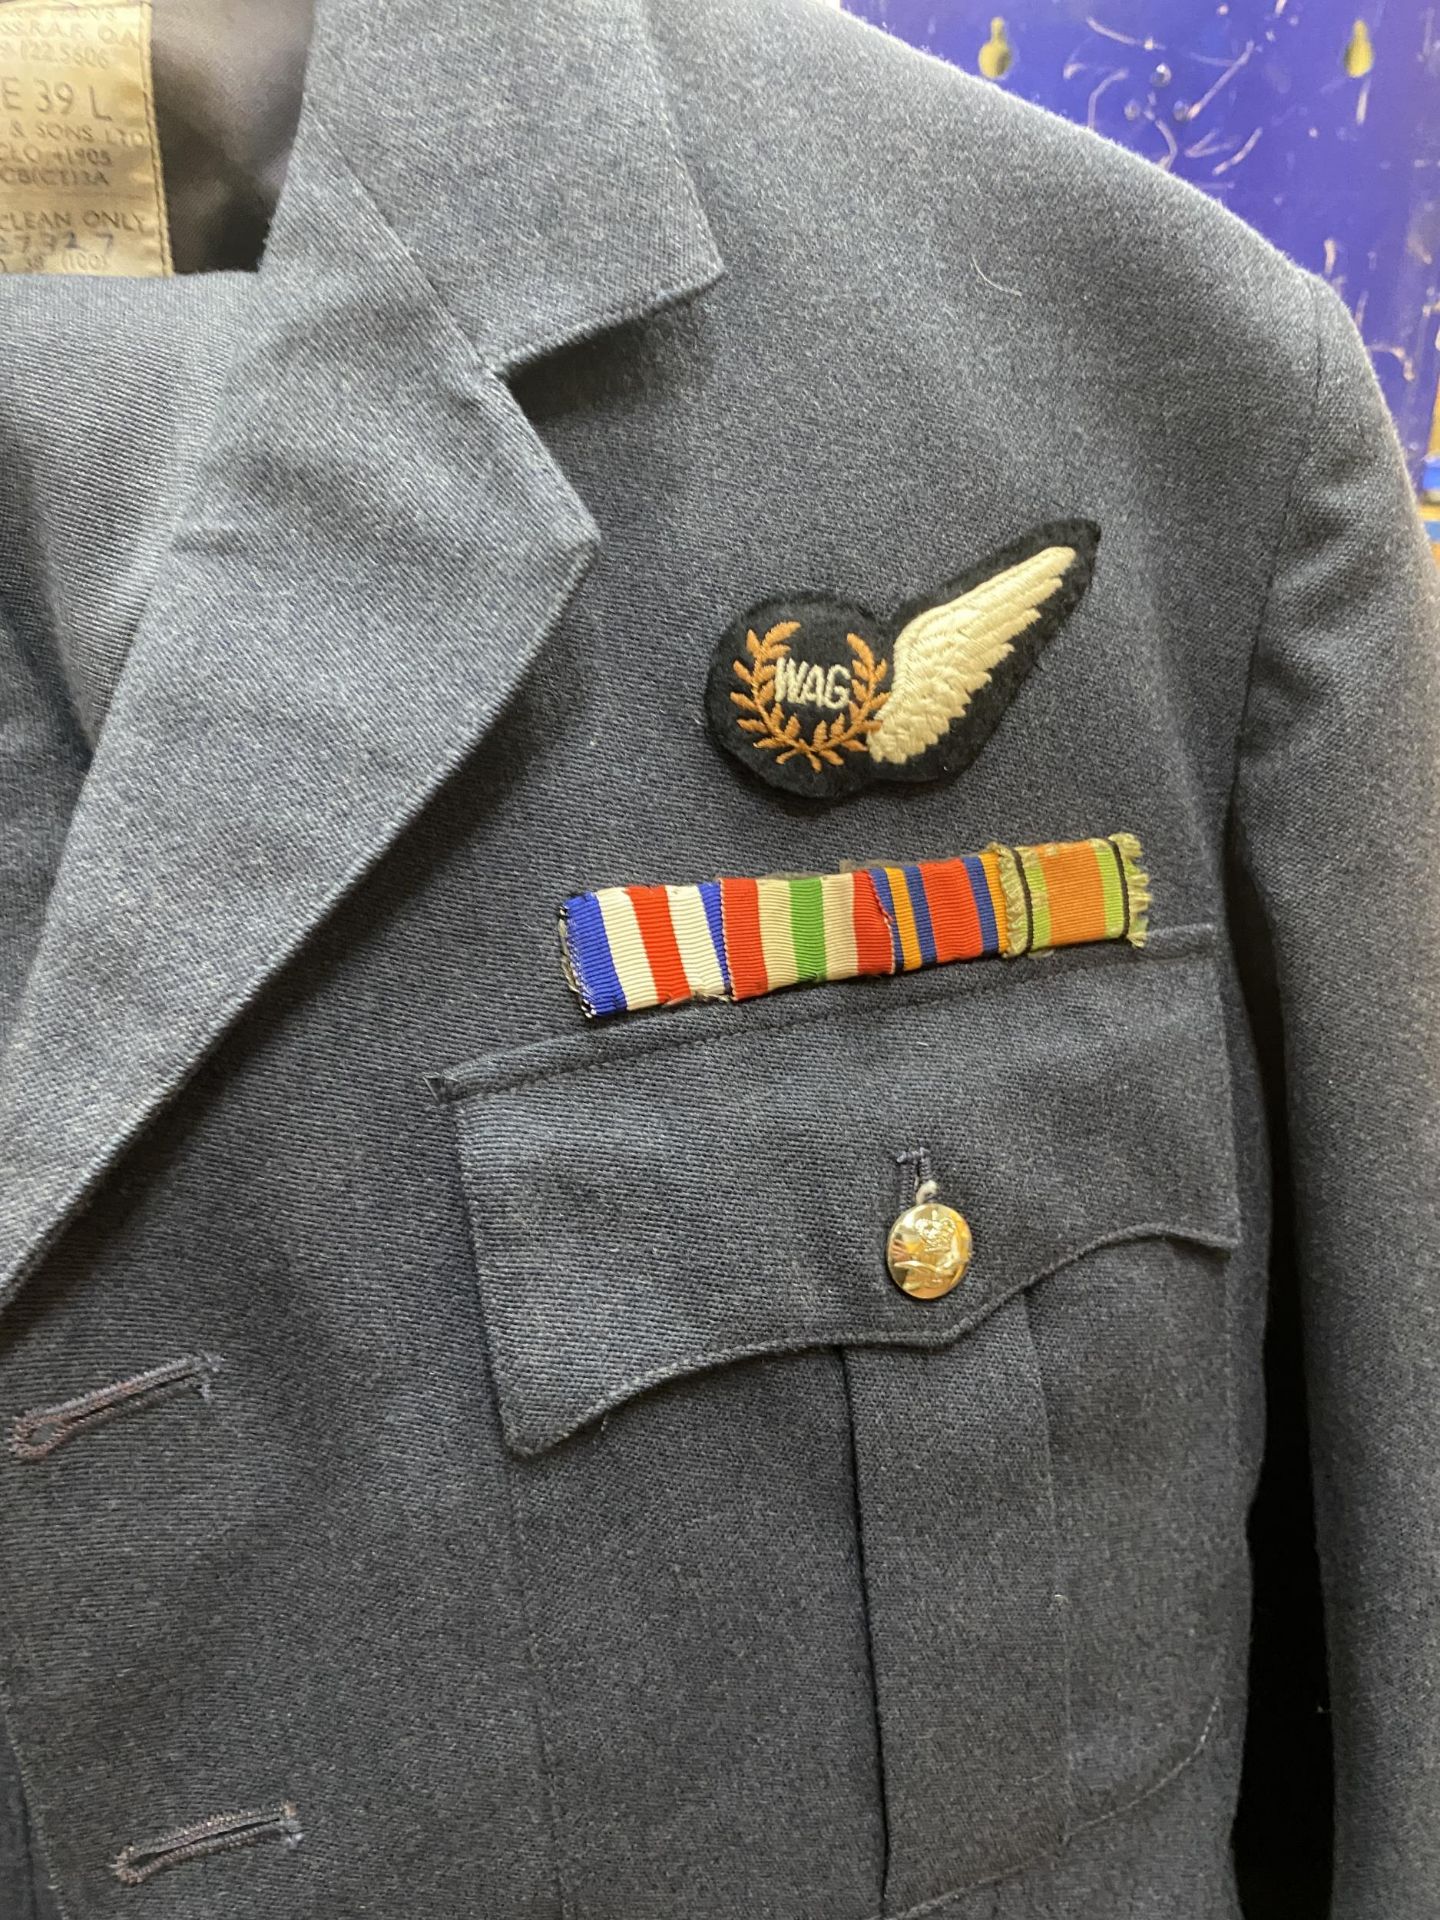 A RAF MANS NO.1 DRESS UNIFORM, JACKET SIZE 39l, COMPRISING JACKET AND TROUSERS - Image 2 of 2